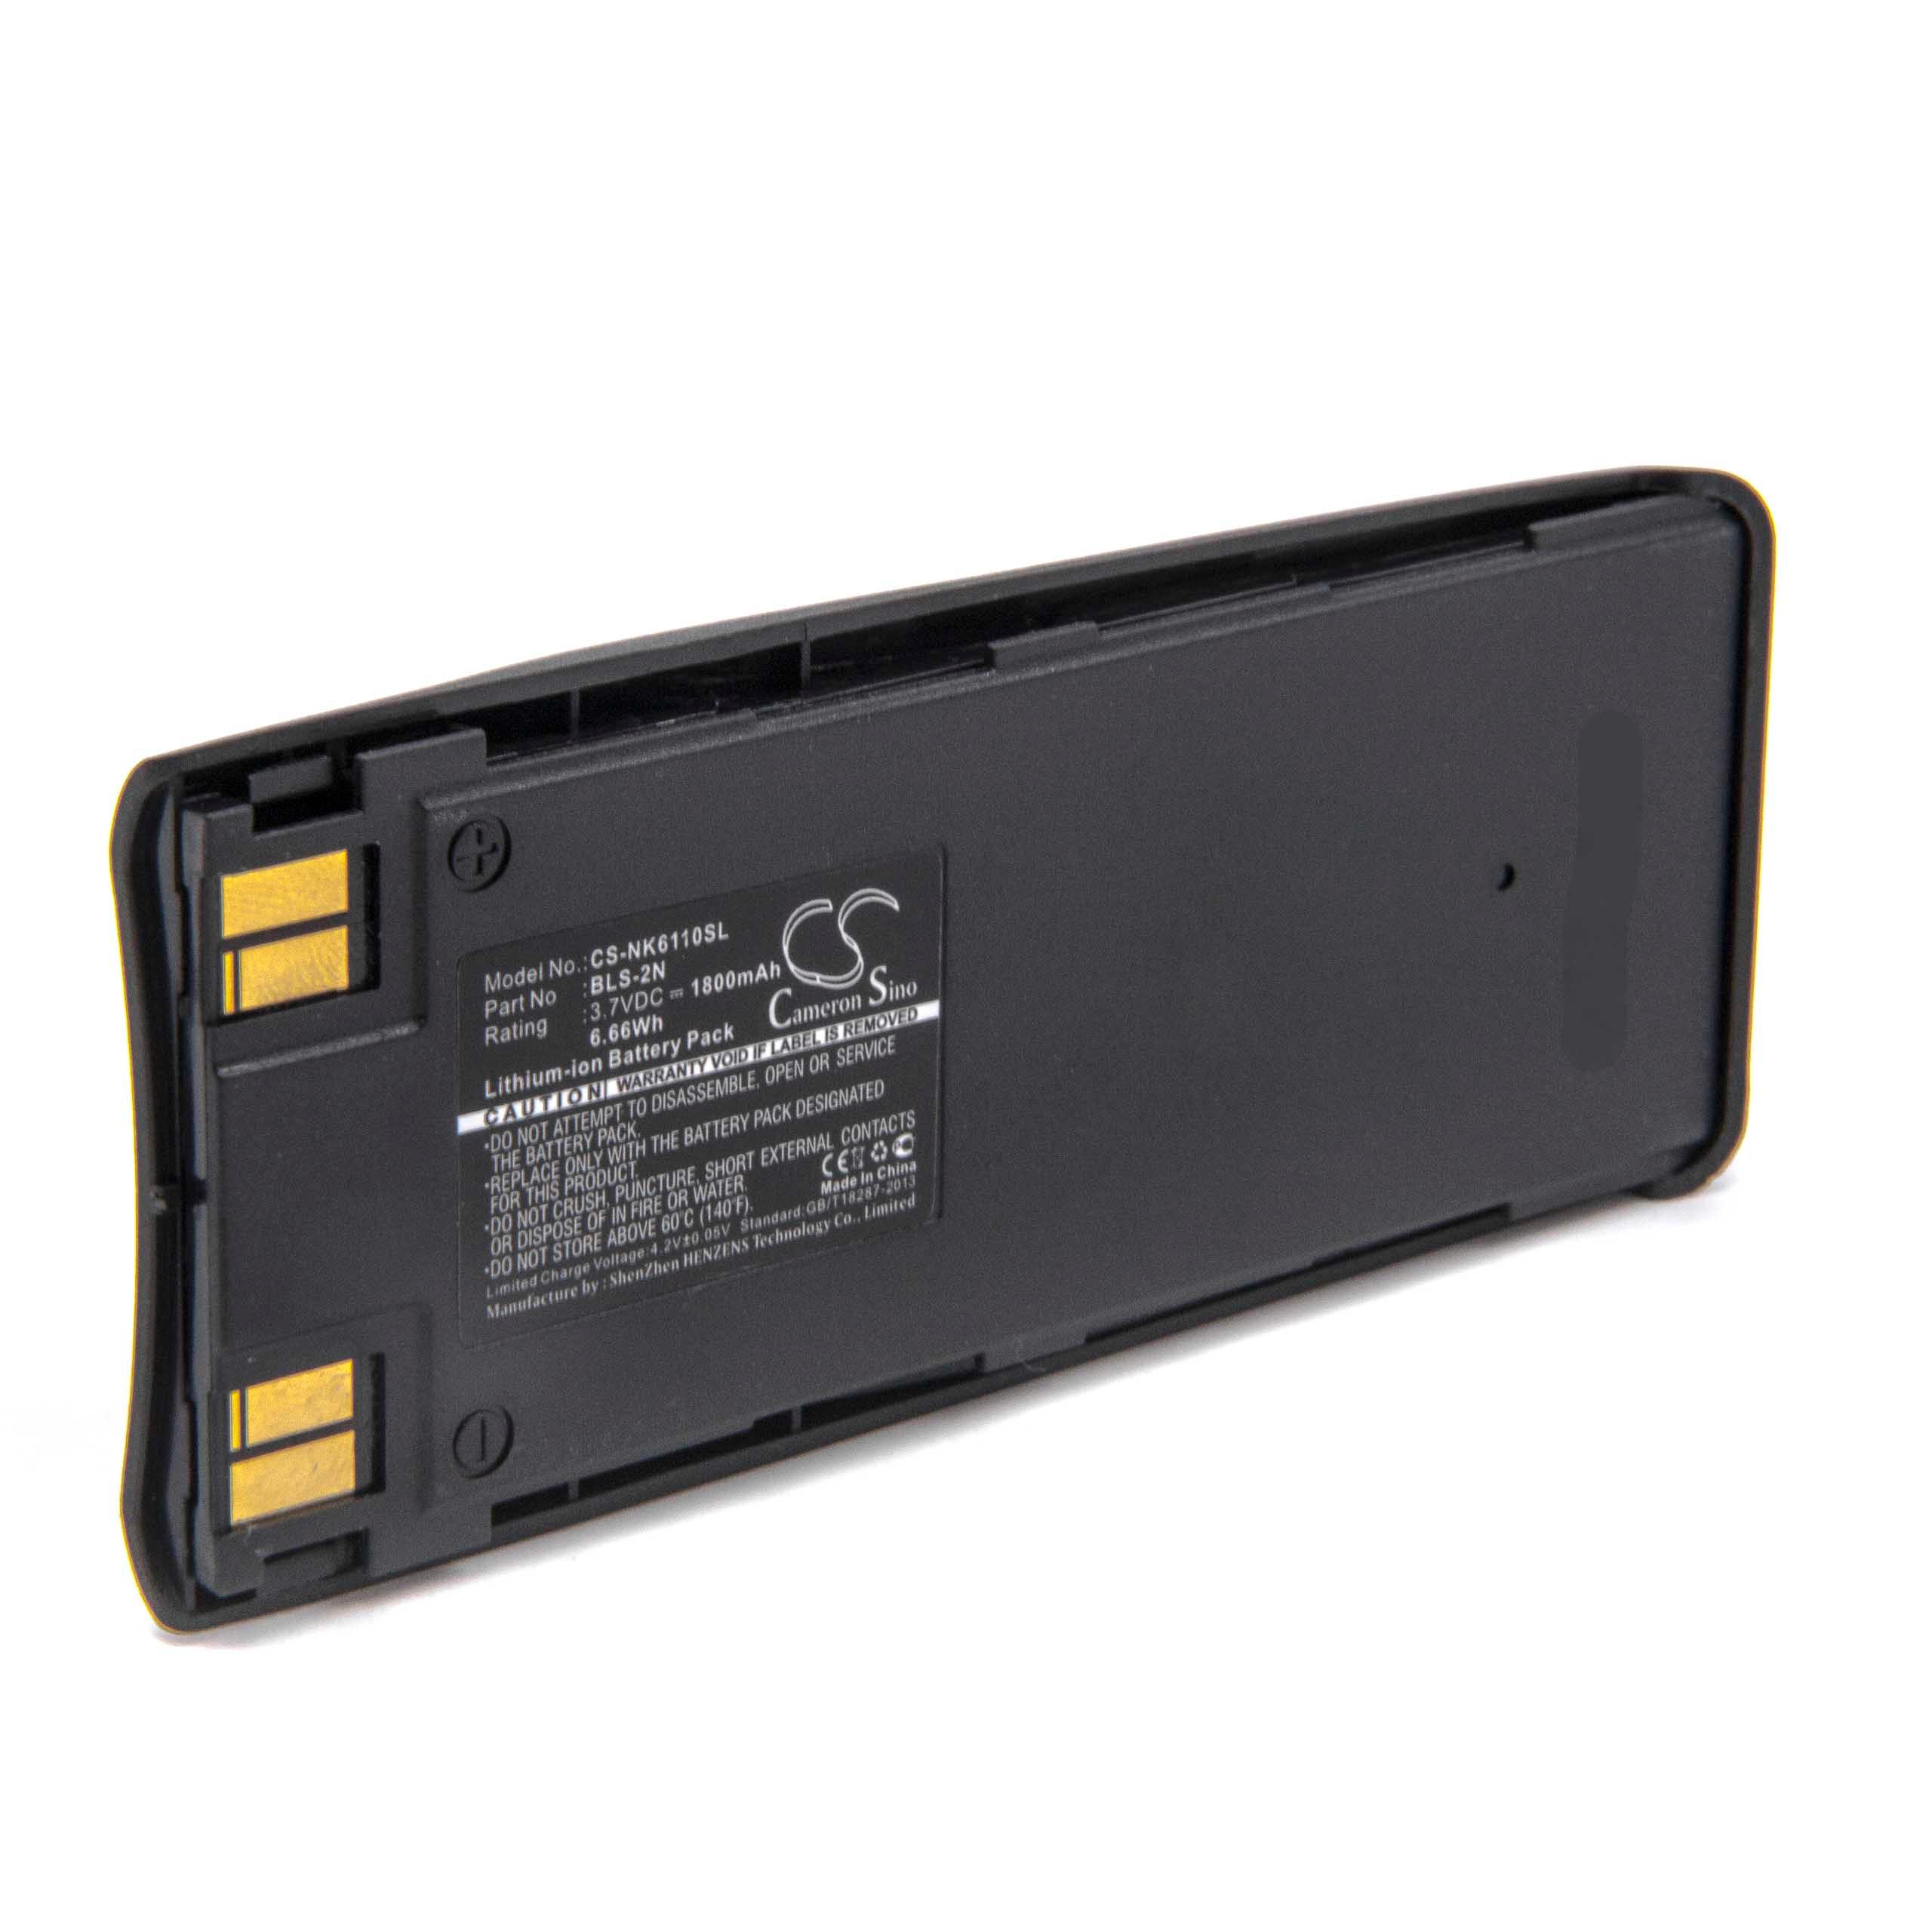 Mobile Phone Battery Replacement for Nokia BLS-4, BMS-2S, BLS-2, BLS-2N - 1800mAh 3.7V Li-Ion + Case Cover